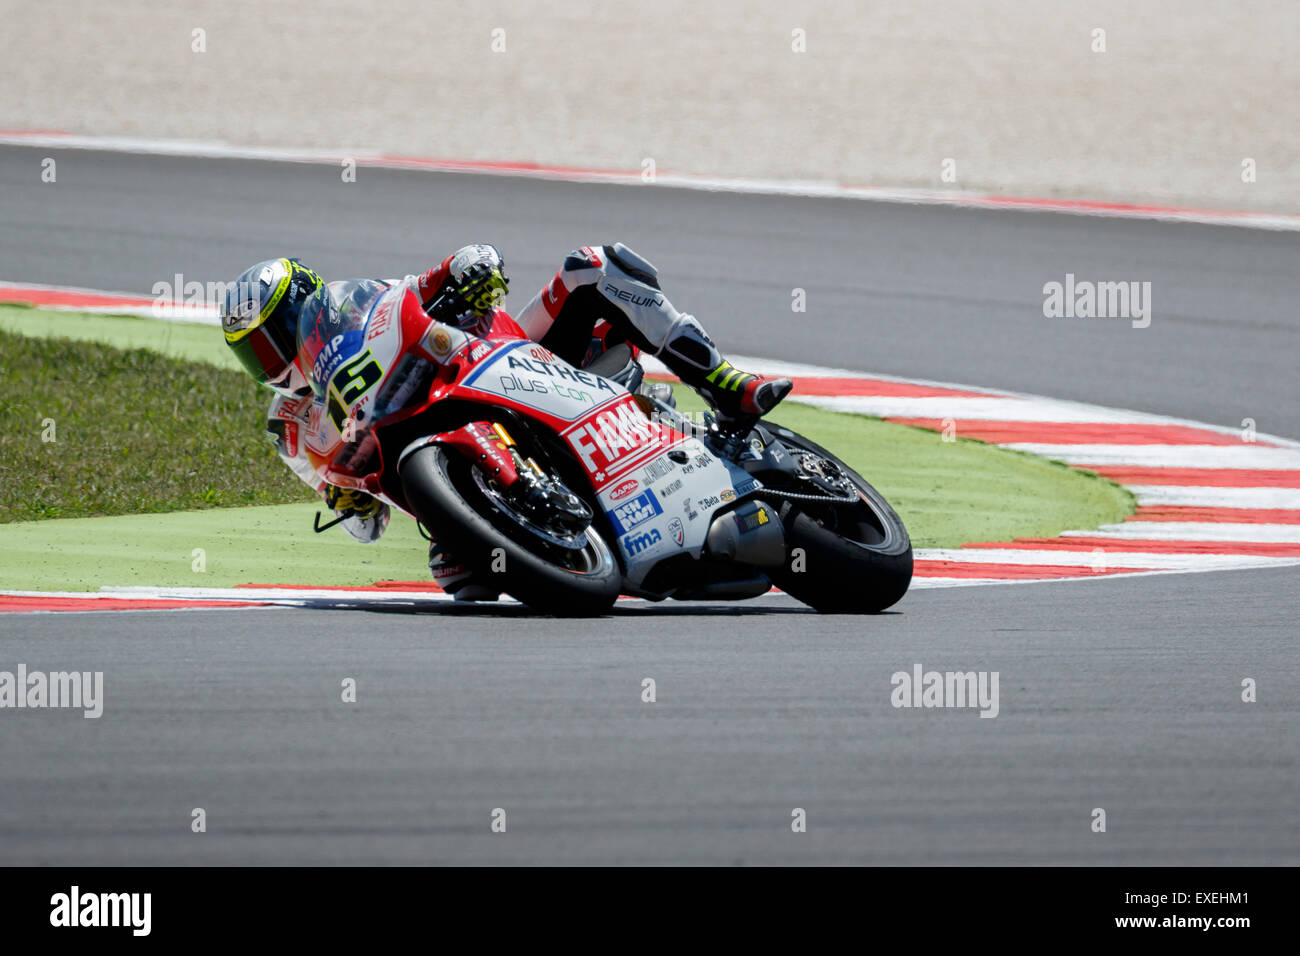 Misano Adriatico, Italy - June 21, 2015: Ducati Panigale R of Althea Racing Team, driven by BAIOCCO Matteo Stock Photo